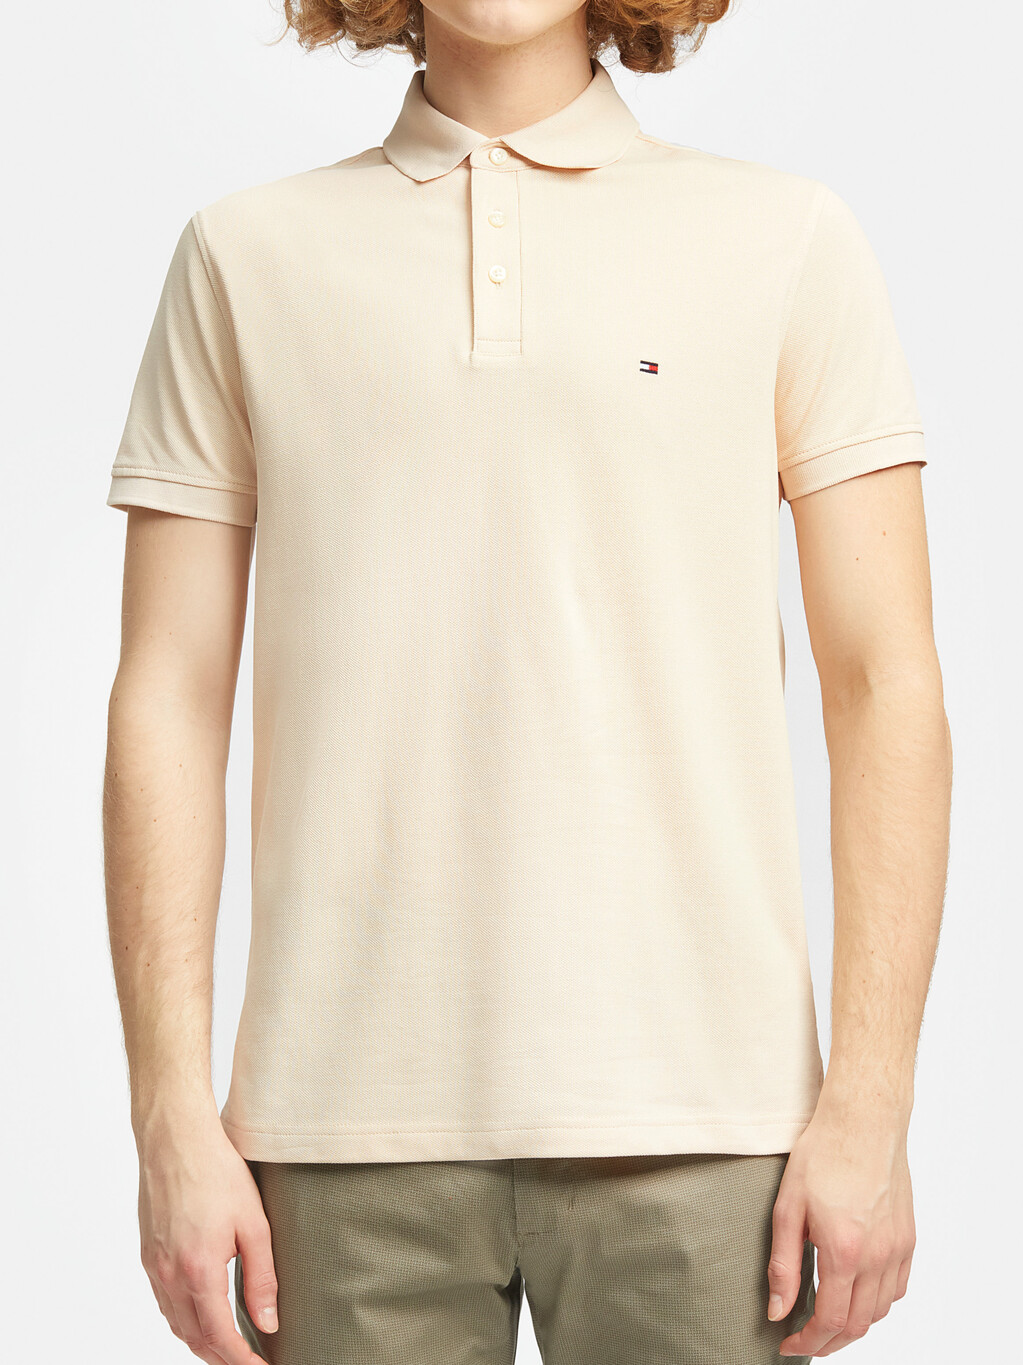 1985 Collection Slim Fit Polo, Tuscan Beige, hi-res